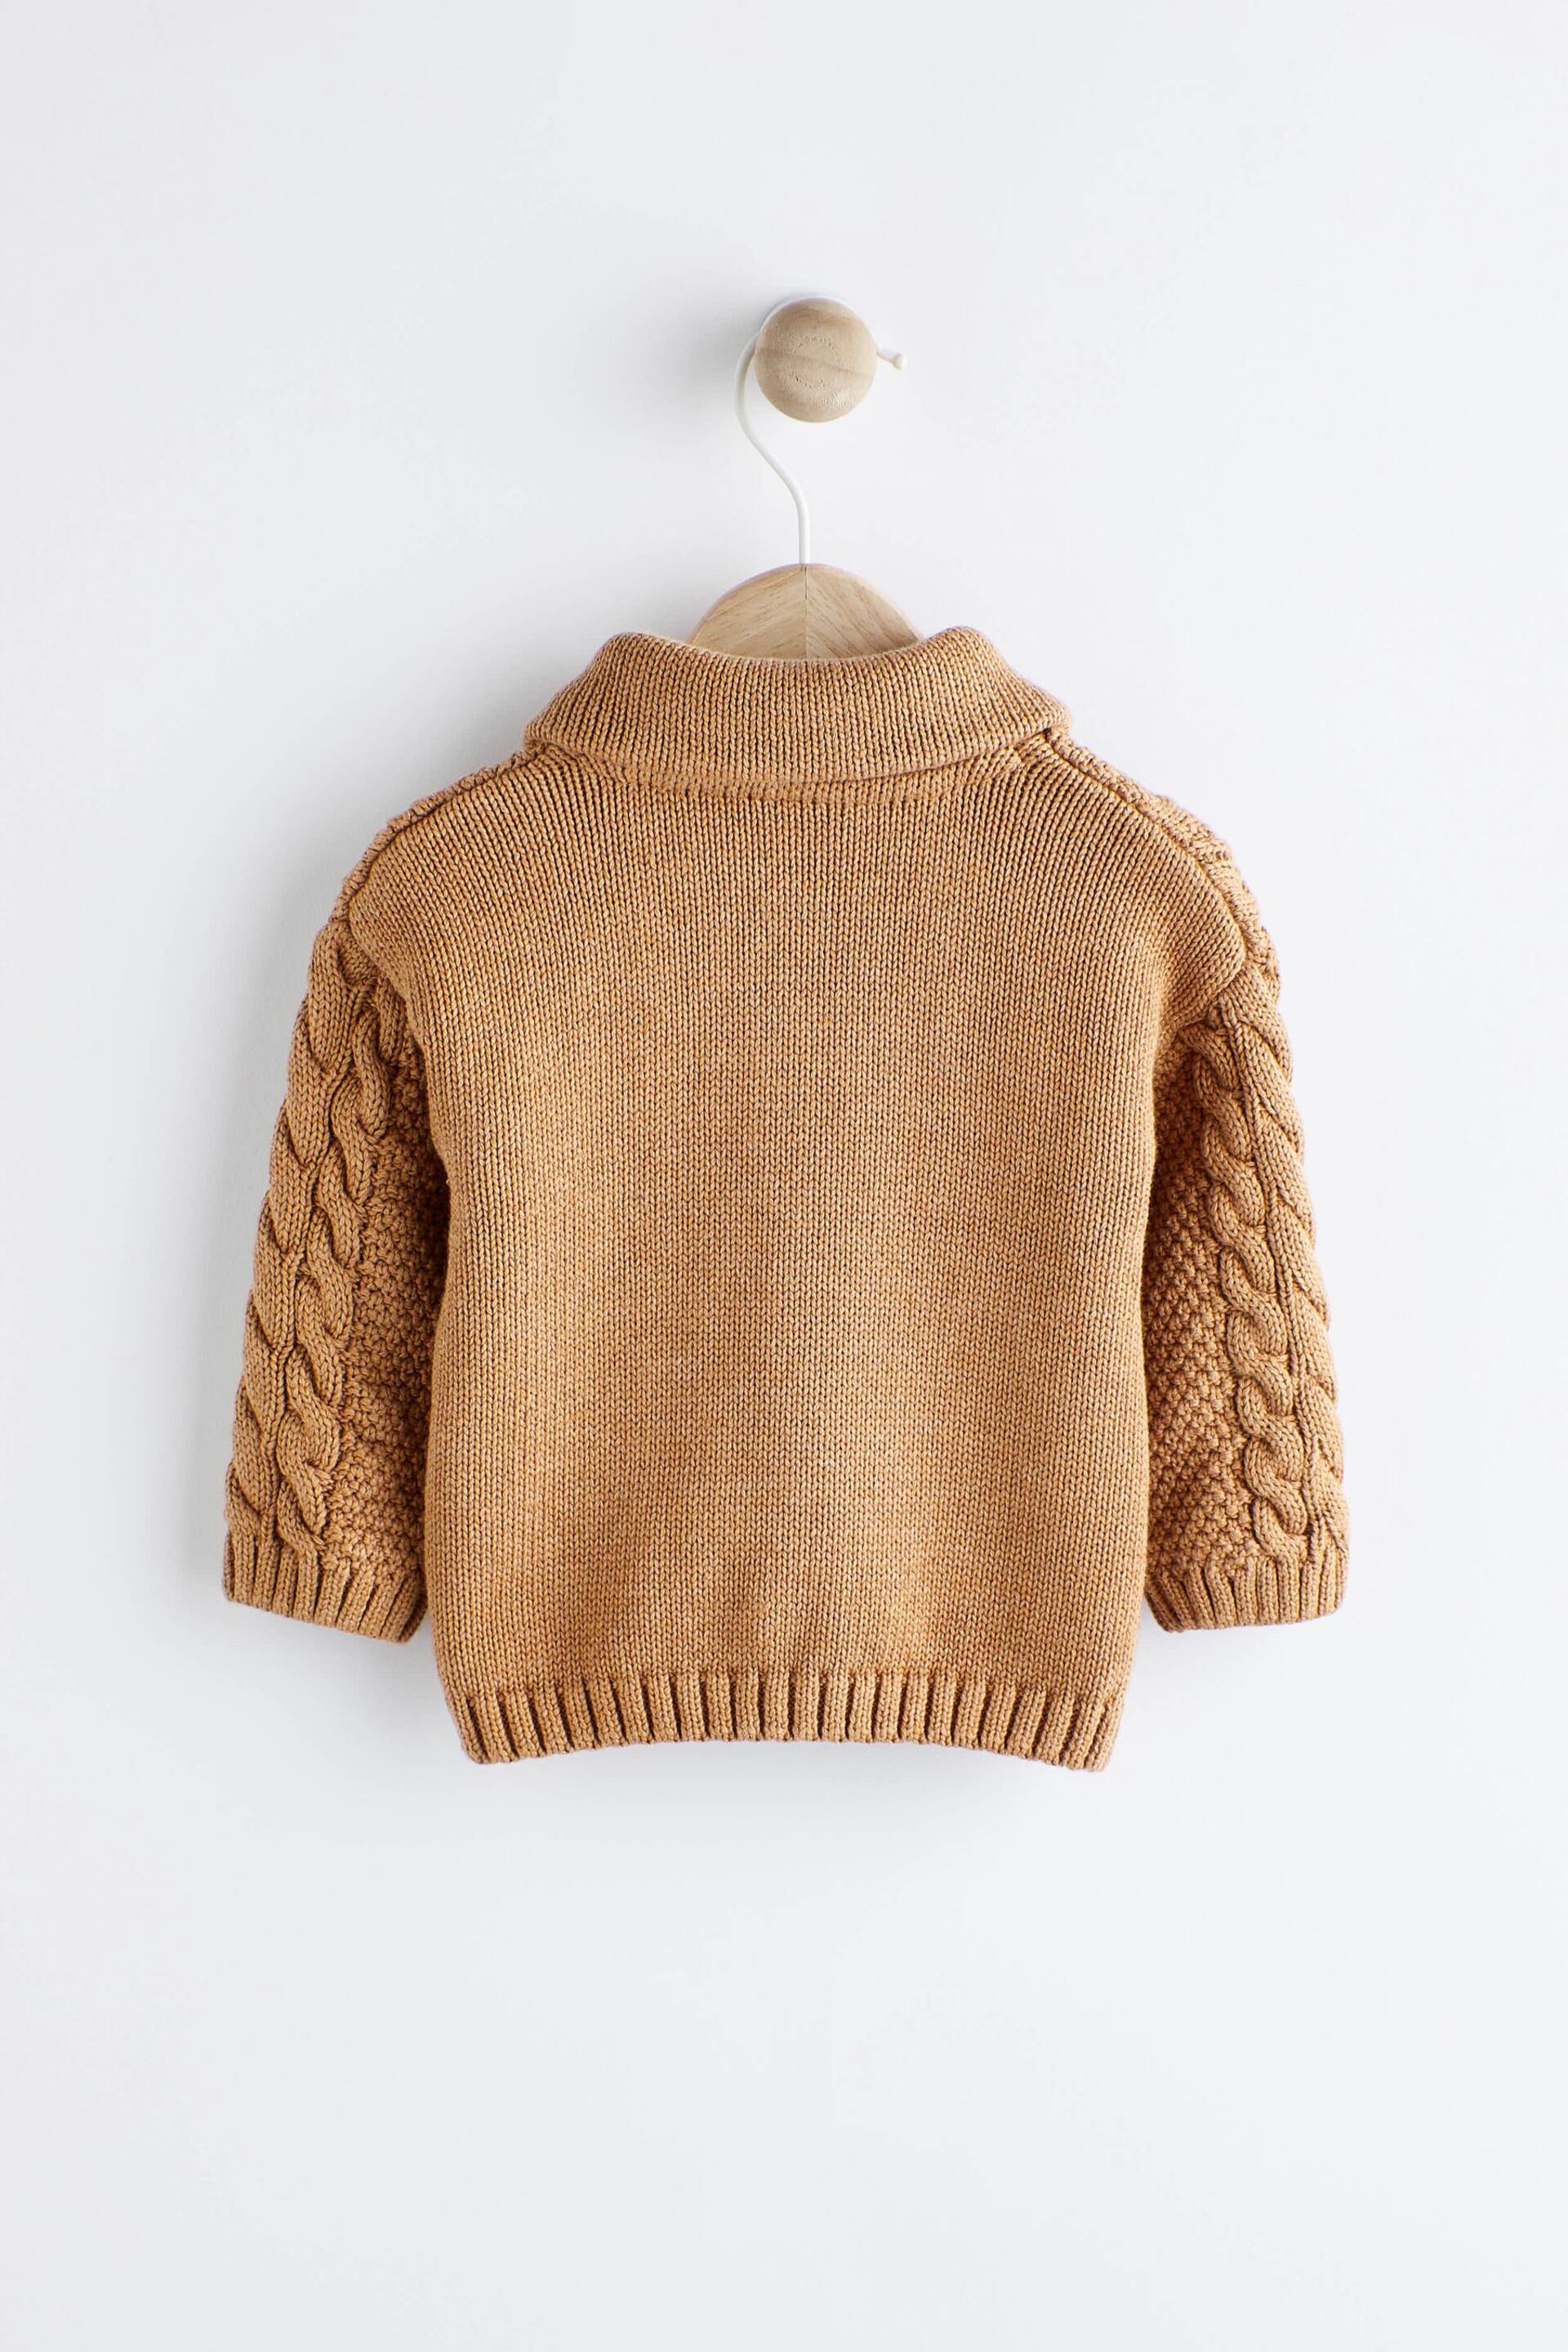 Tan Brown Cable Knitted Baby Cardigan (0mths-2yrs) - Image 2 of 7